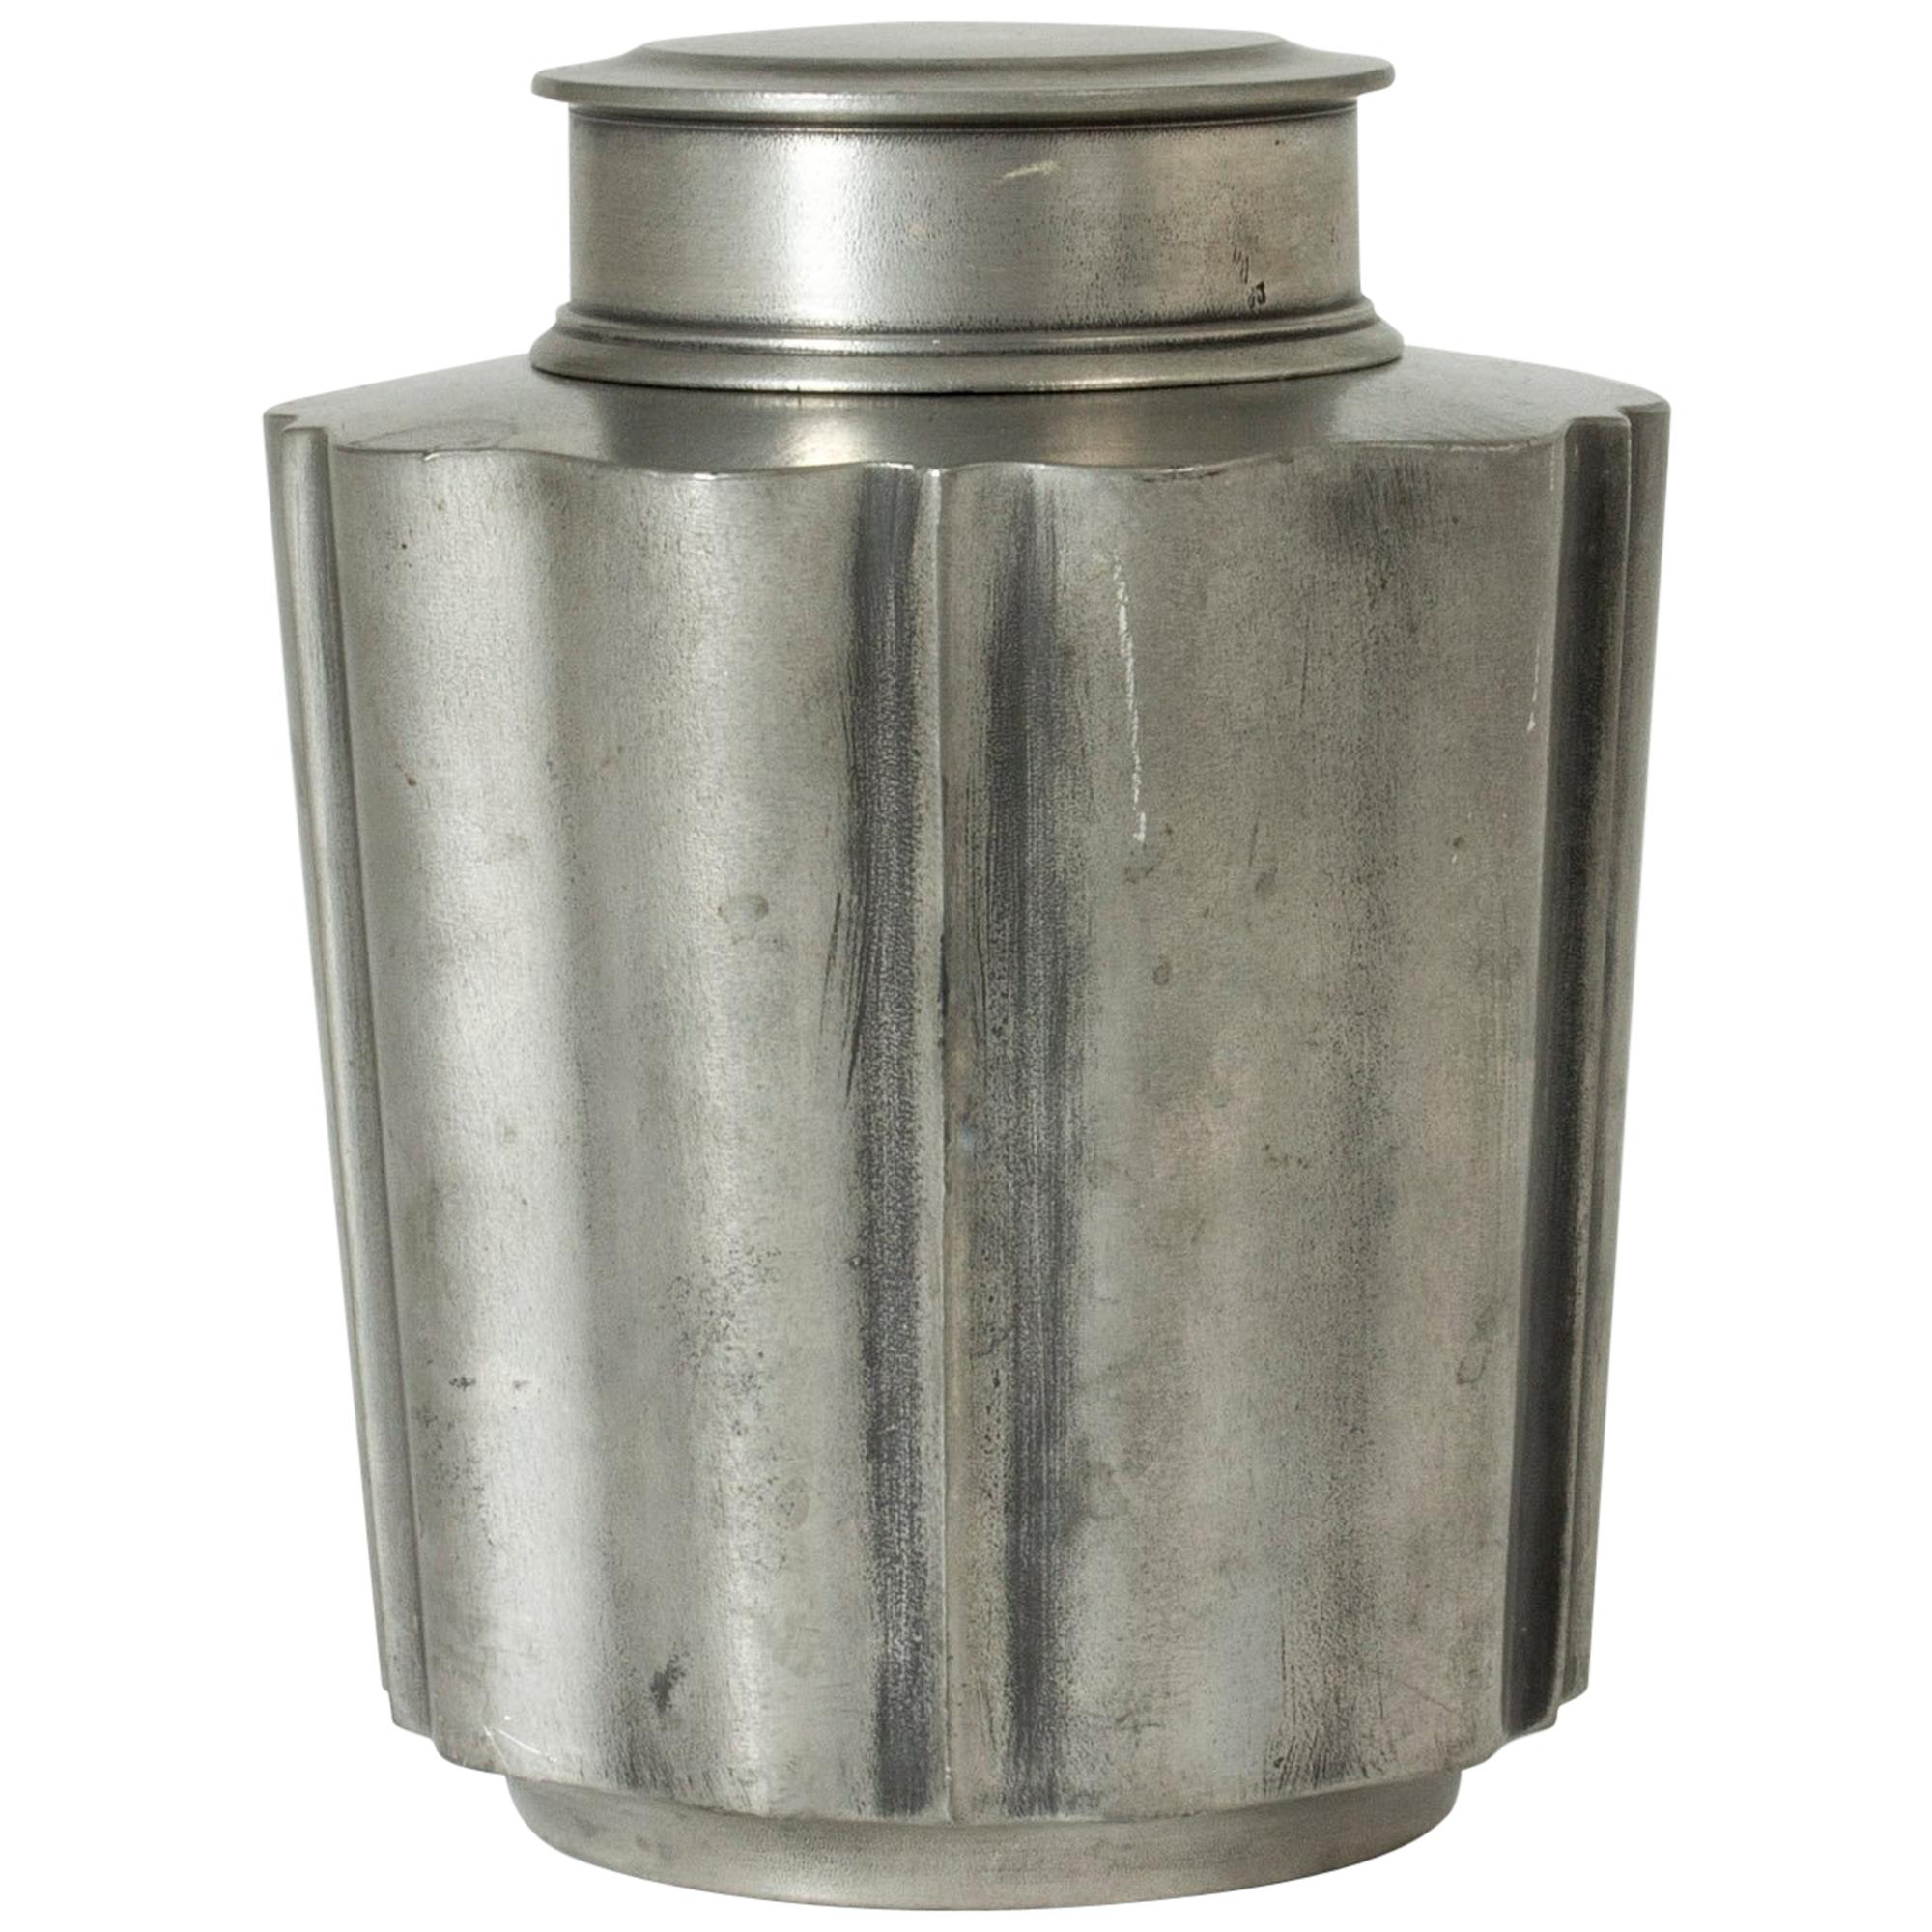 1940s Pewter Jar by Edvin Ollers